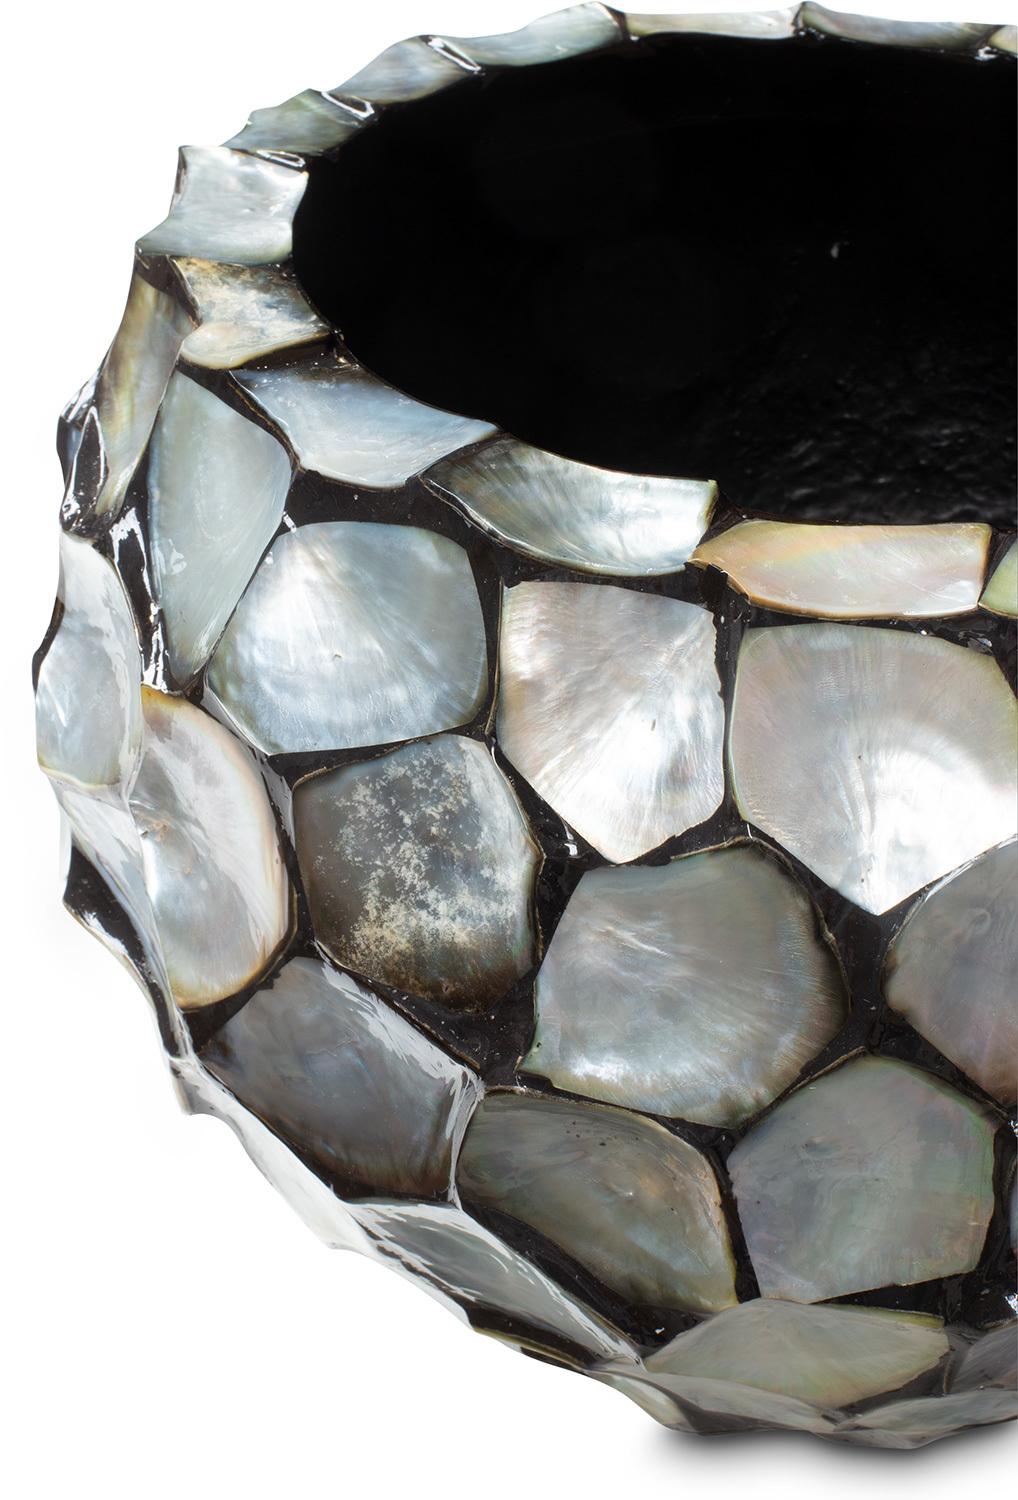 SHELL planter, 40/77 cm, silver/blue mother of pearl